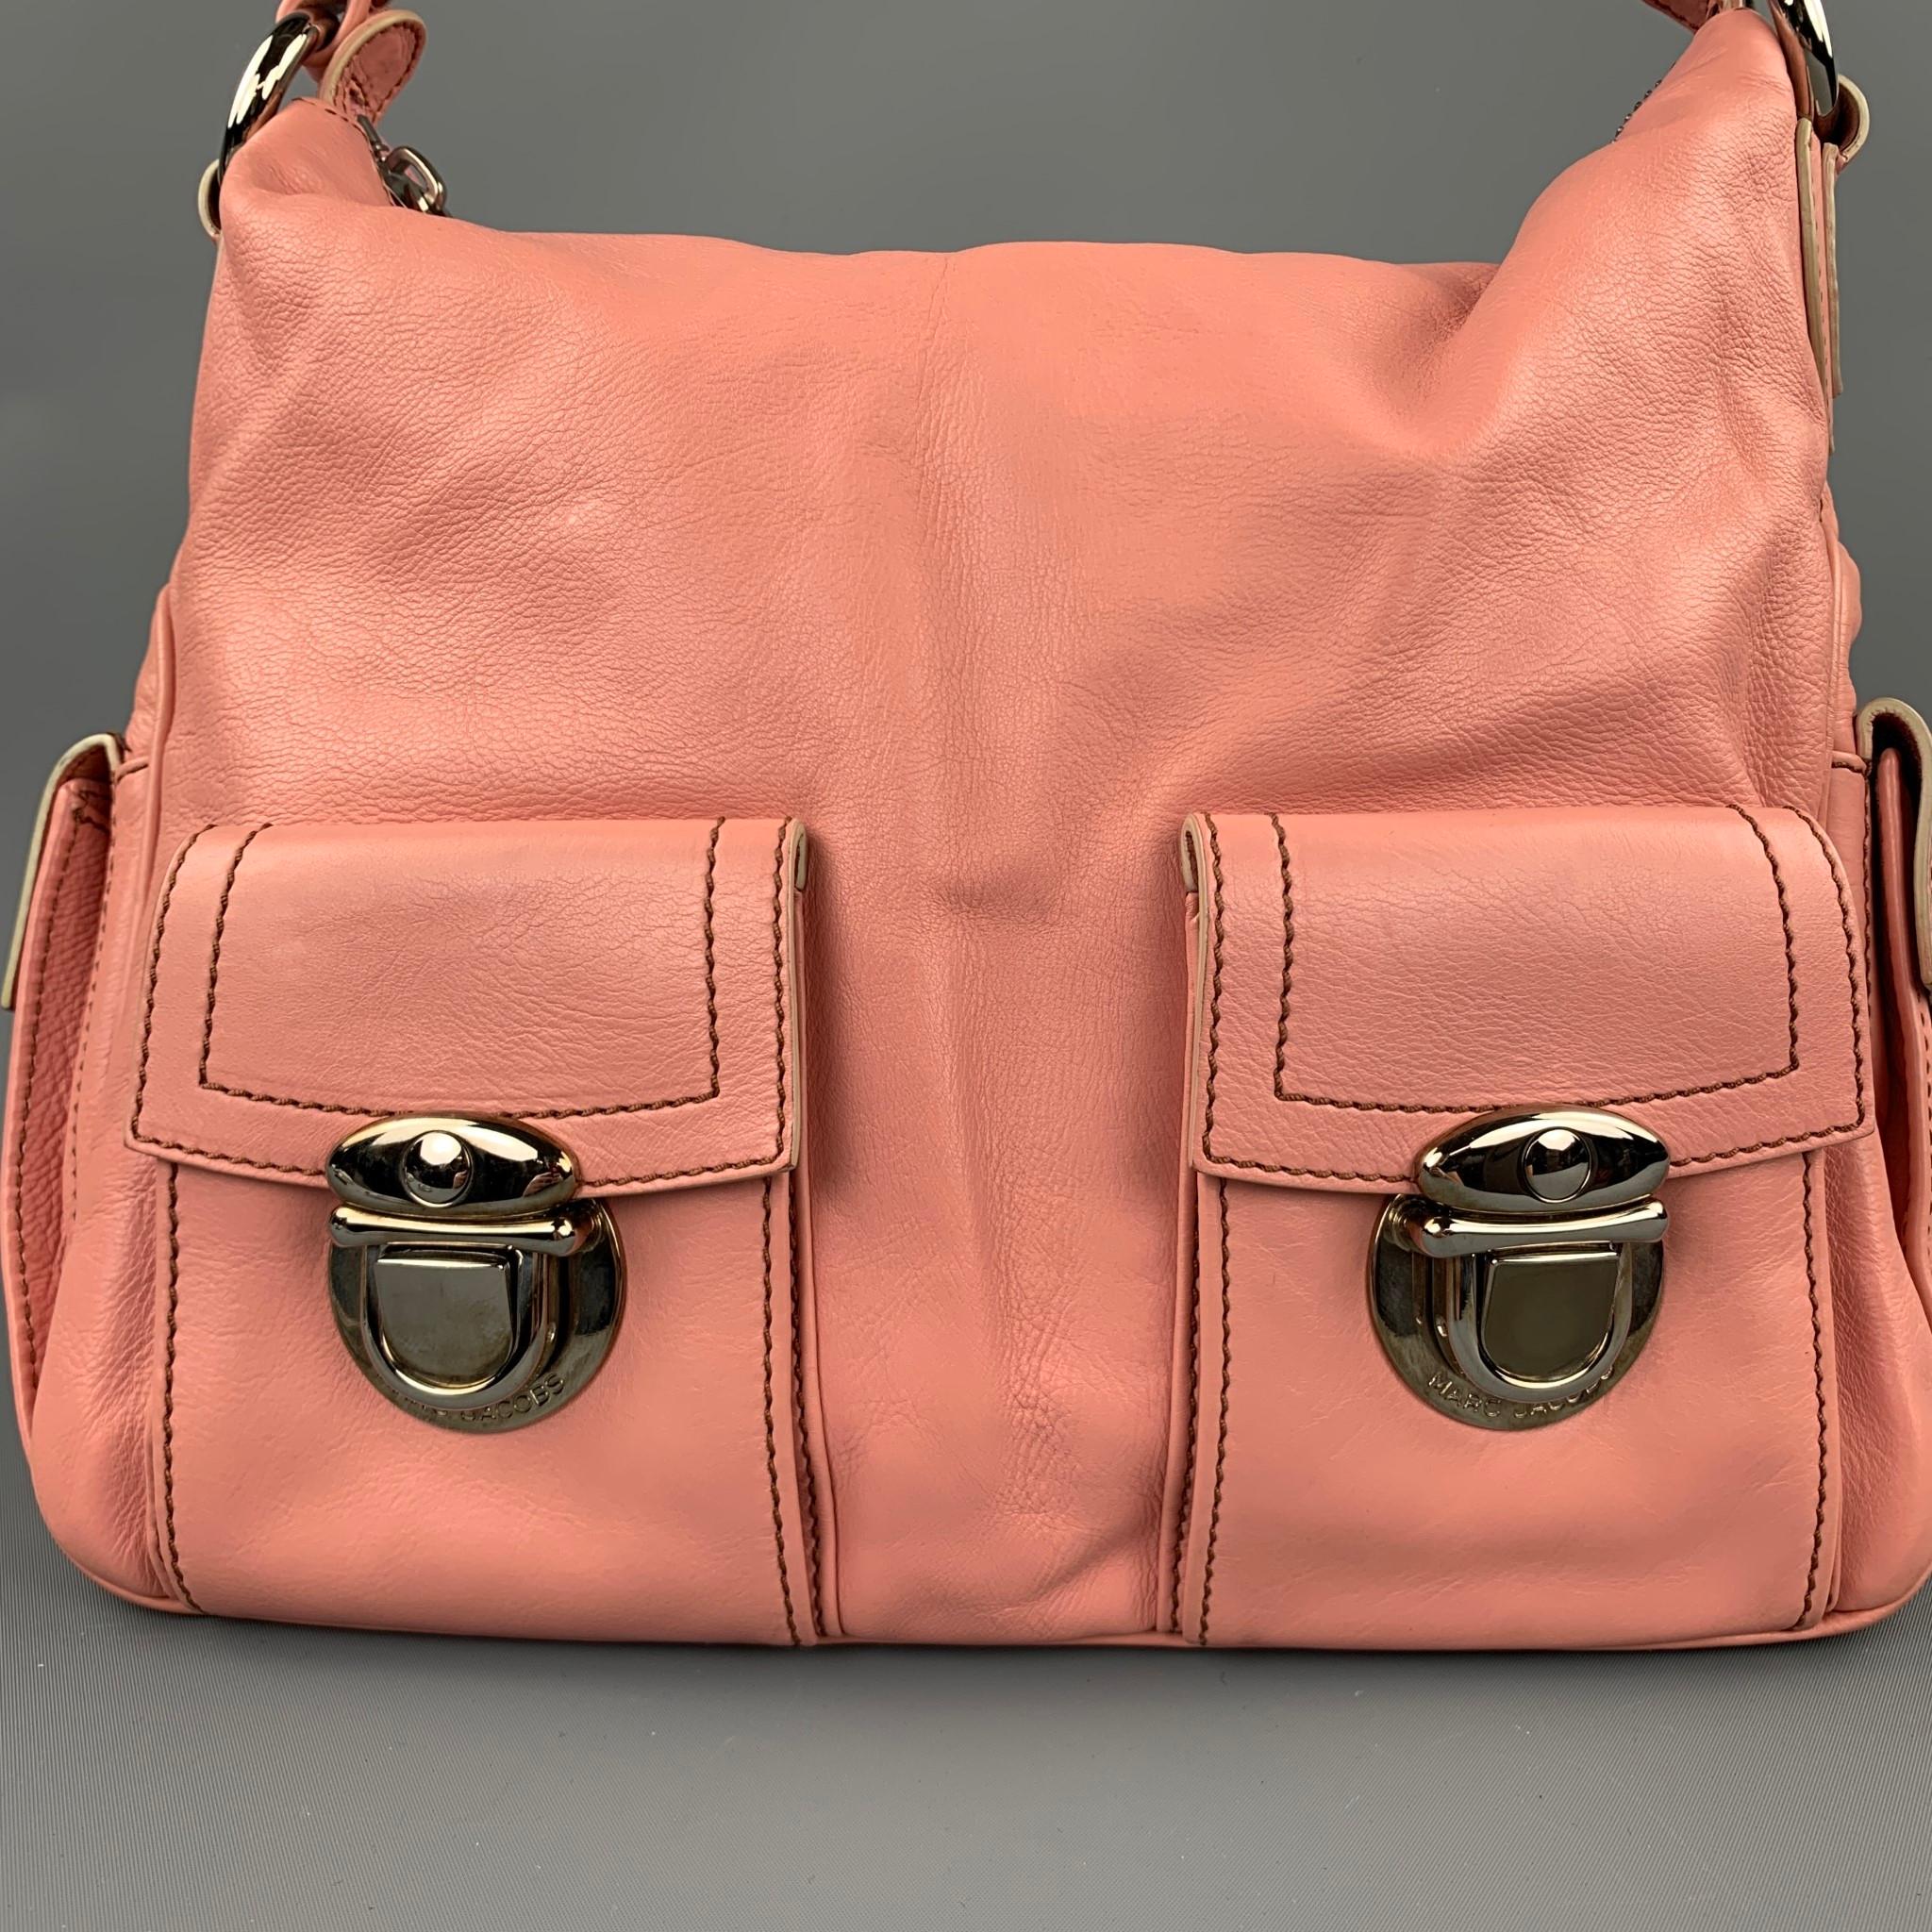 MARC JACOBS handbag comes in a pink leather with contrast stitching with a suede liner featuring top handles, silver tone hardware, pocket details, inner pocket, and a top zip up closure. Minor wear. Made in Italy.

Good Pre-Owned